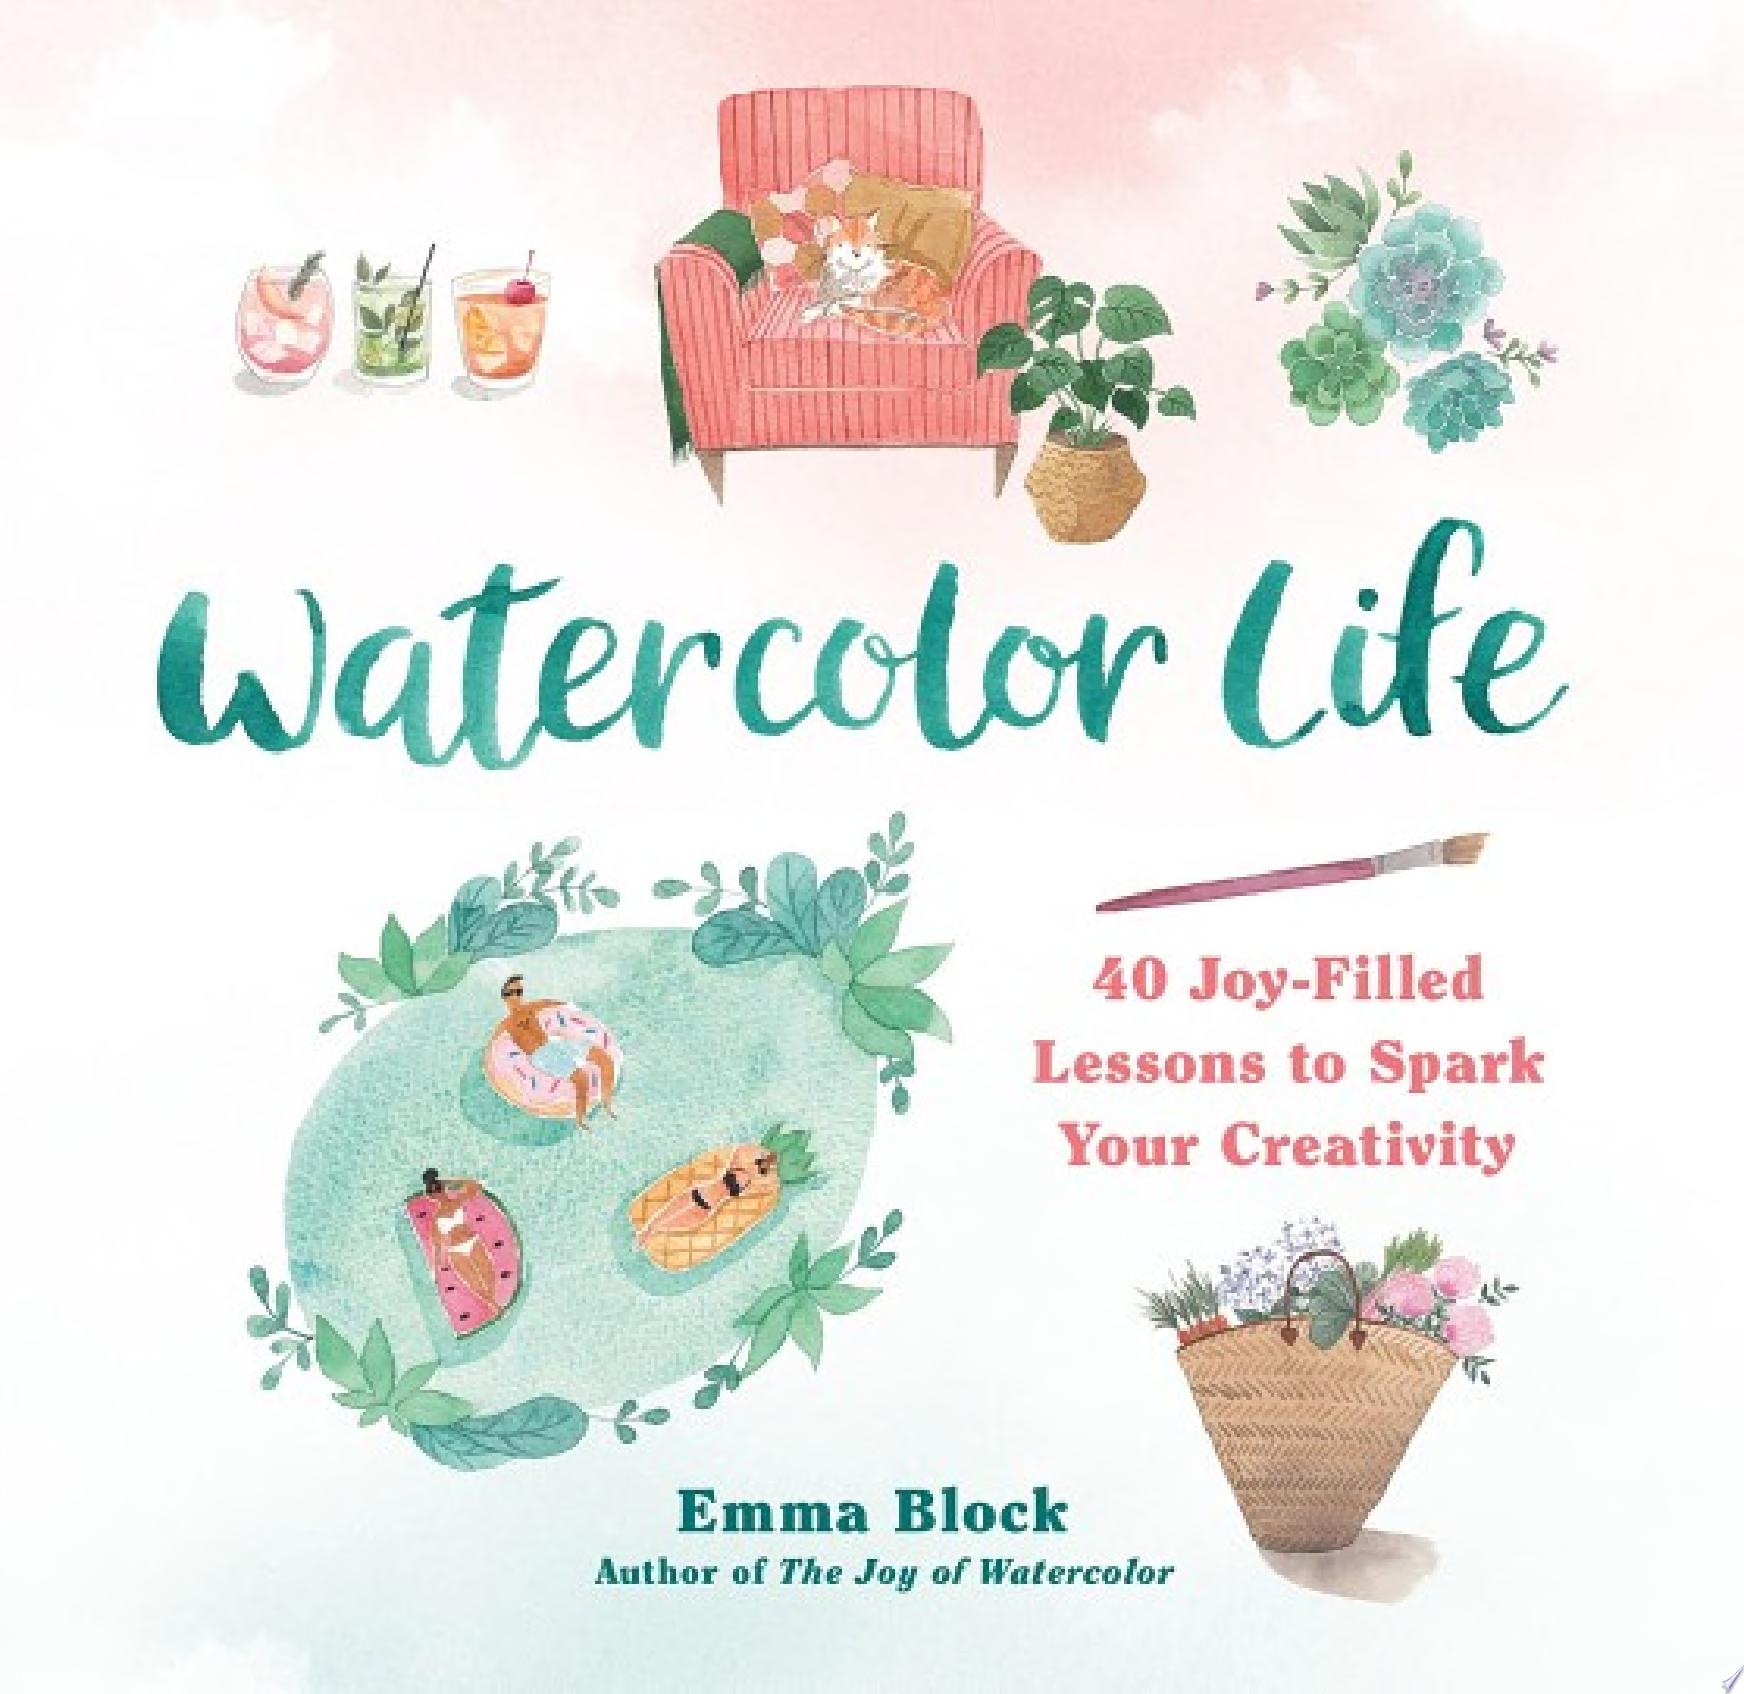 Image for "Watercolor Life"